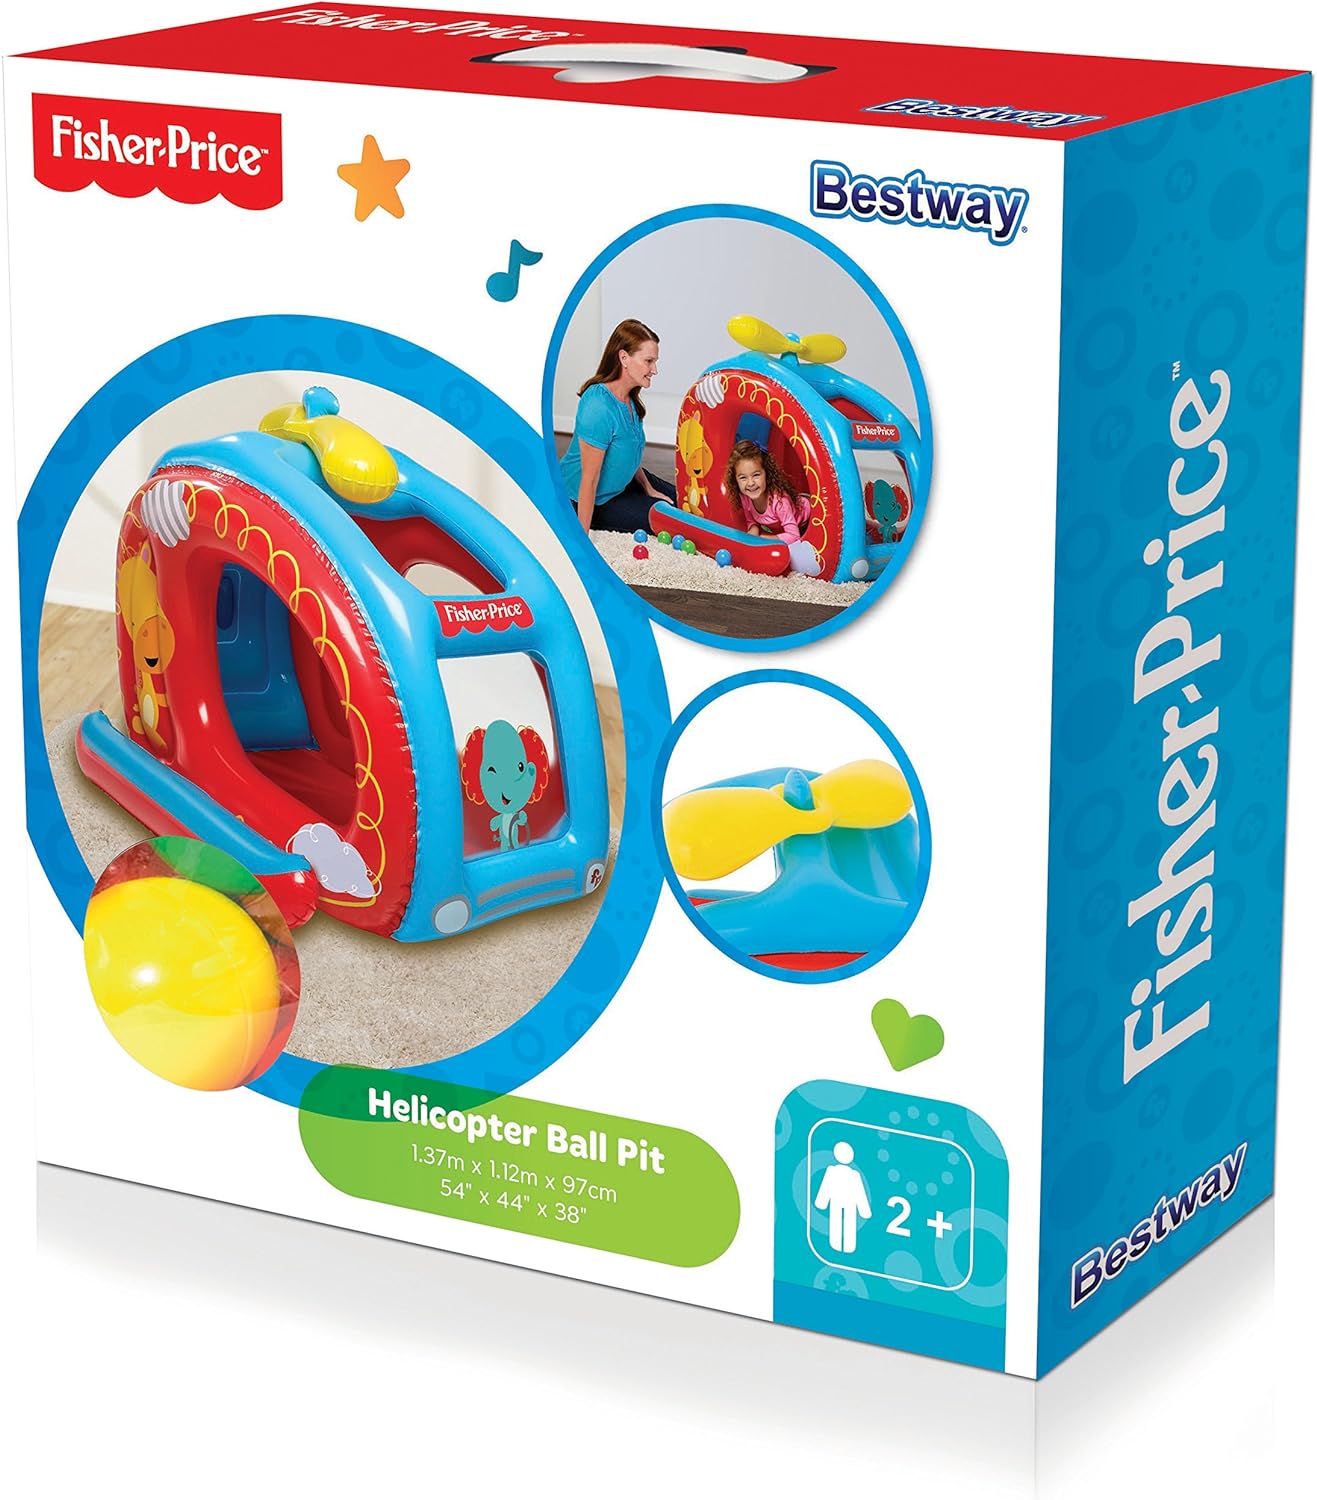 Bestway Spielcenter / Ballebad Fisher Price Activity Centre / Ball Pool Helicopter